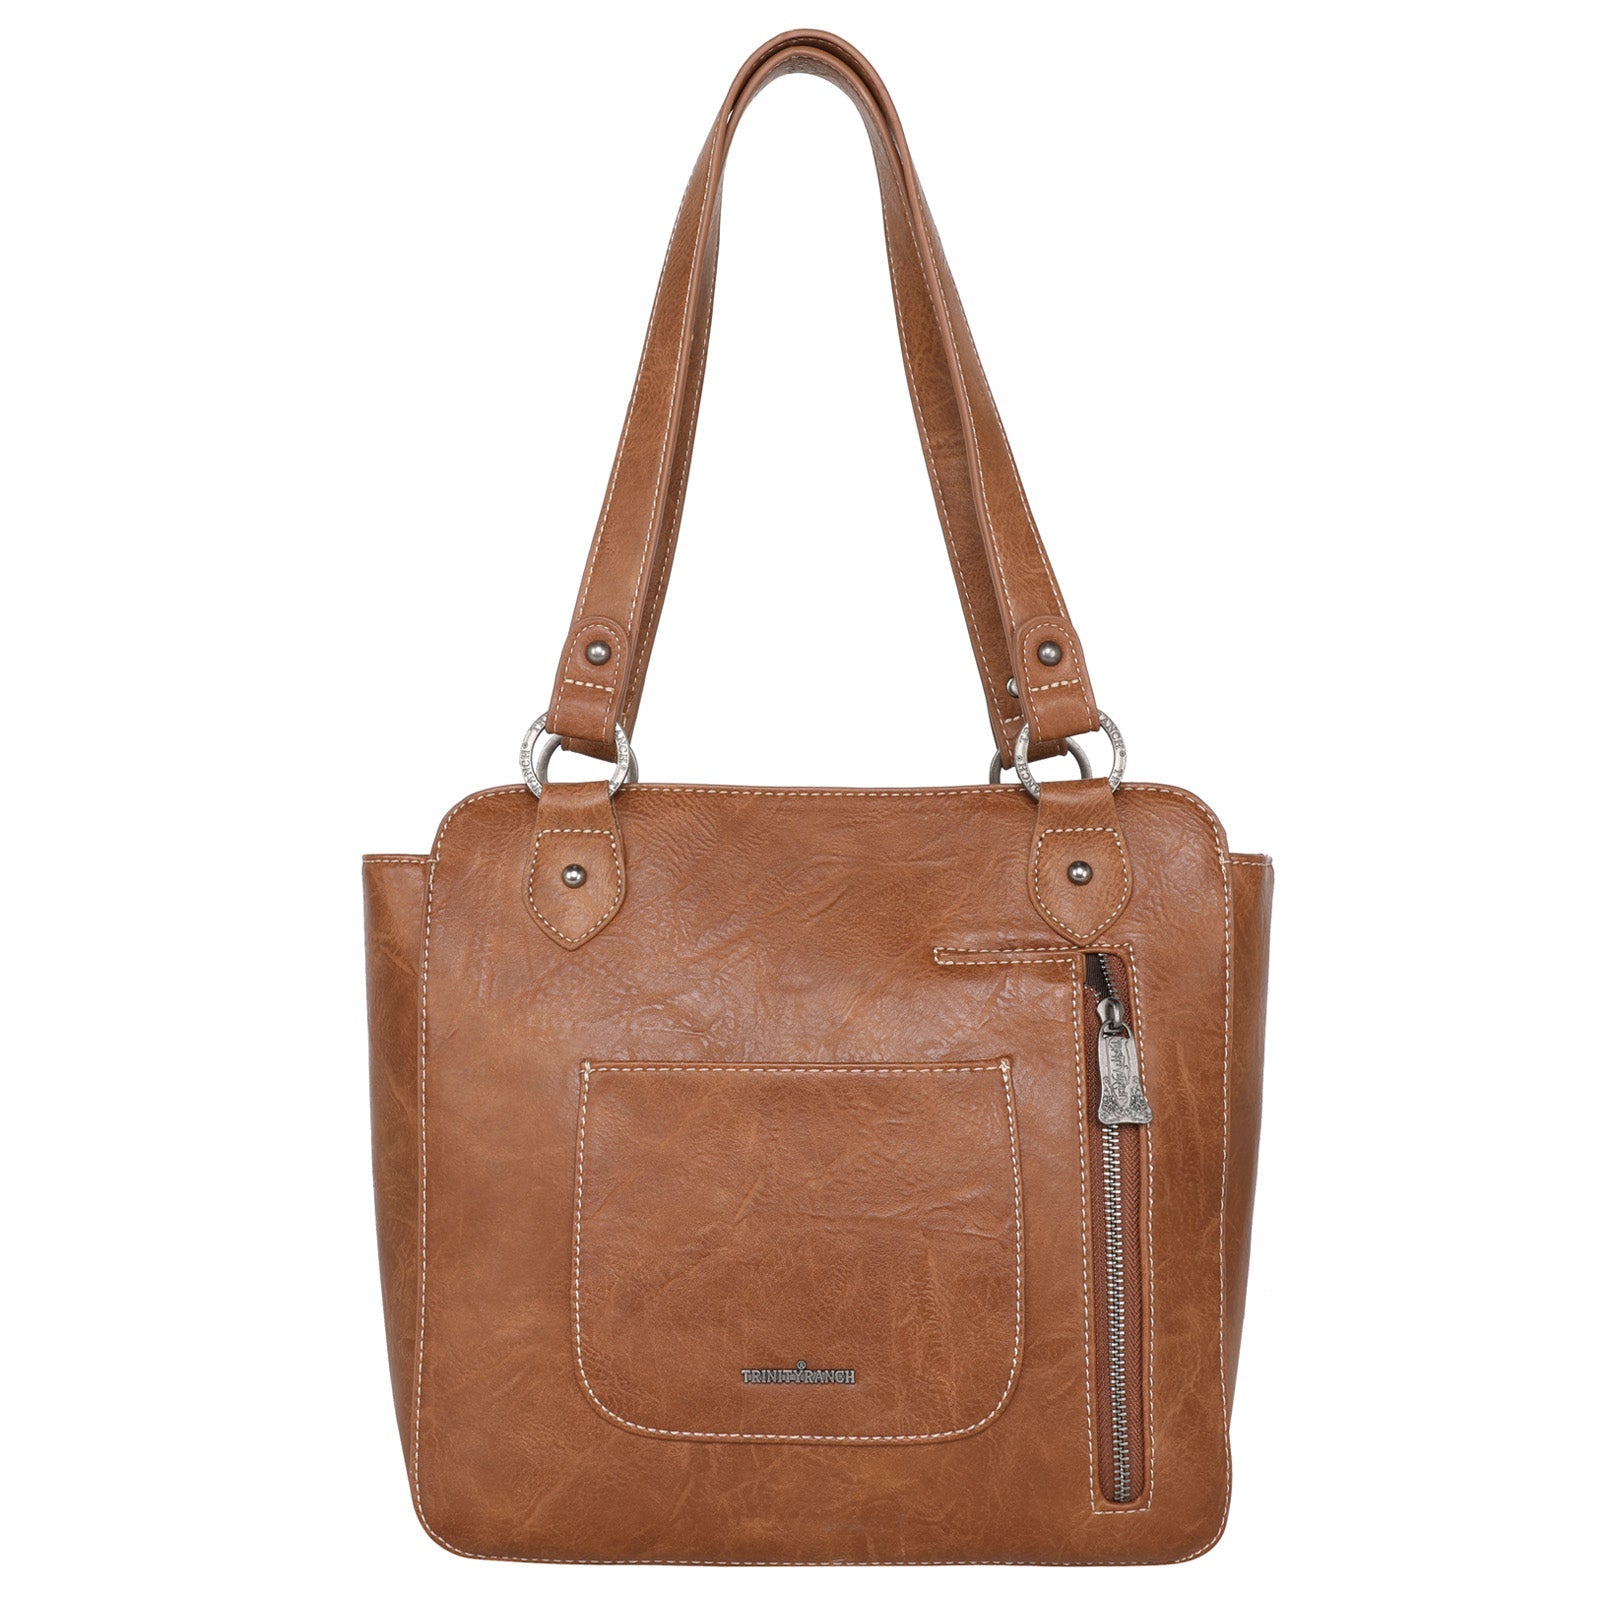 Trinity Ranch Hair-On Cowhide Concealed Carry Tote - Cowgirl Wear